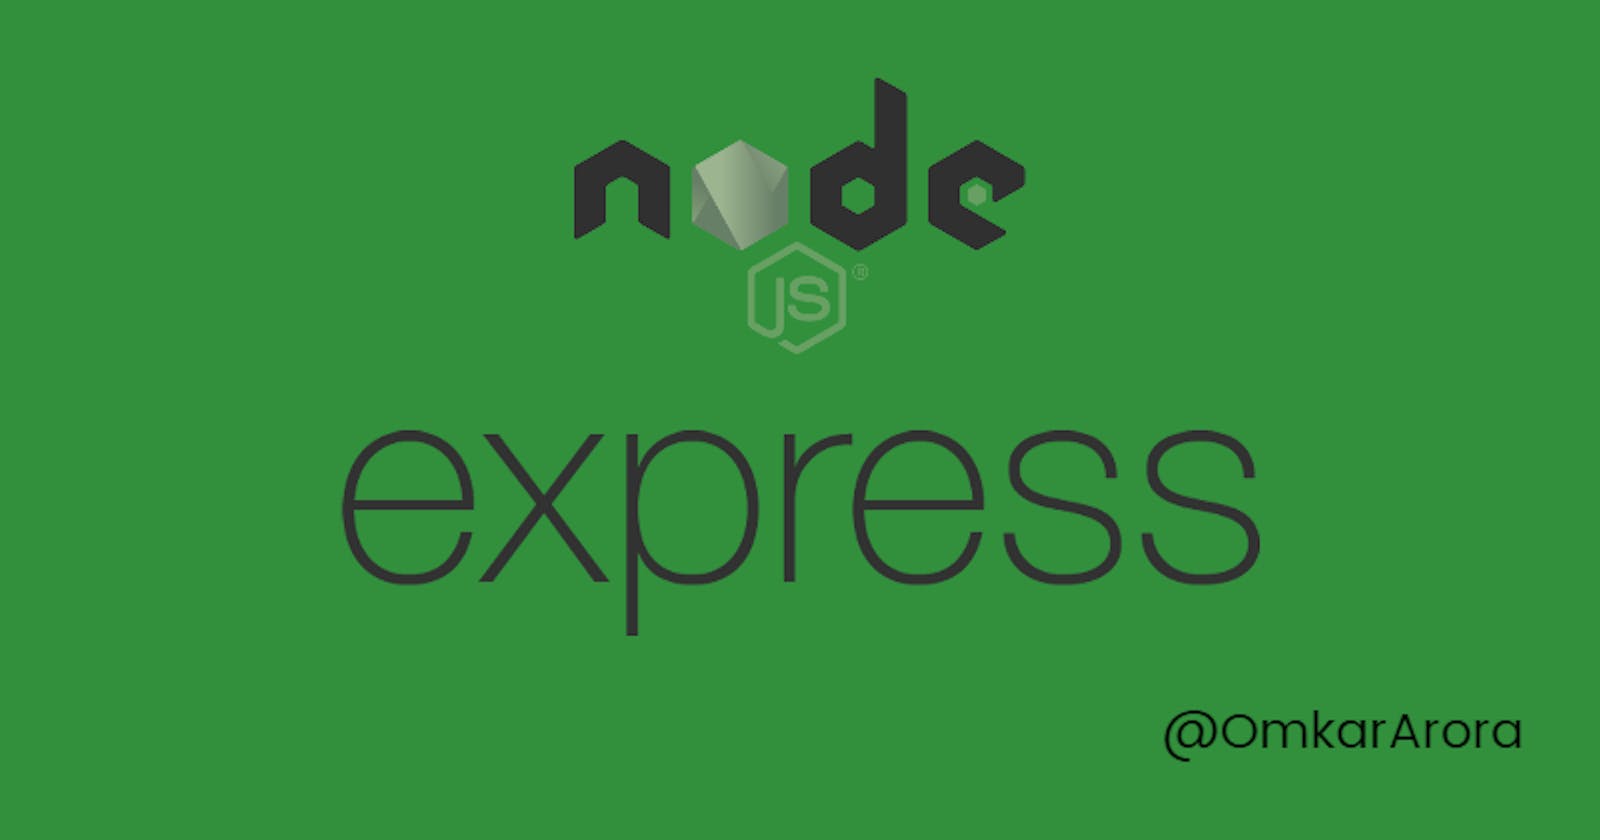 Getting started with Express